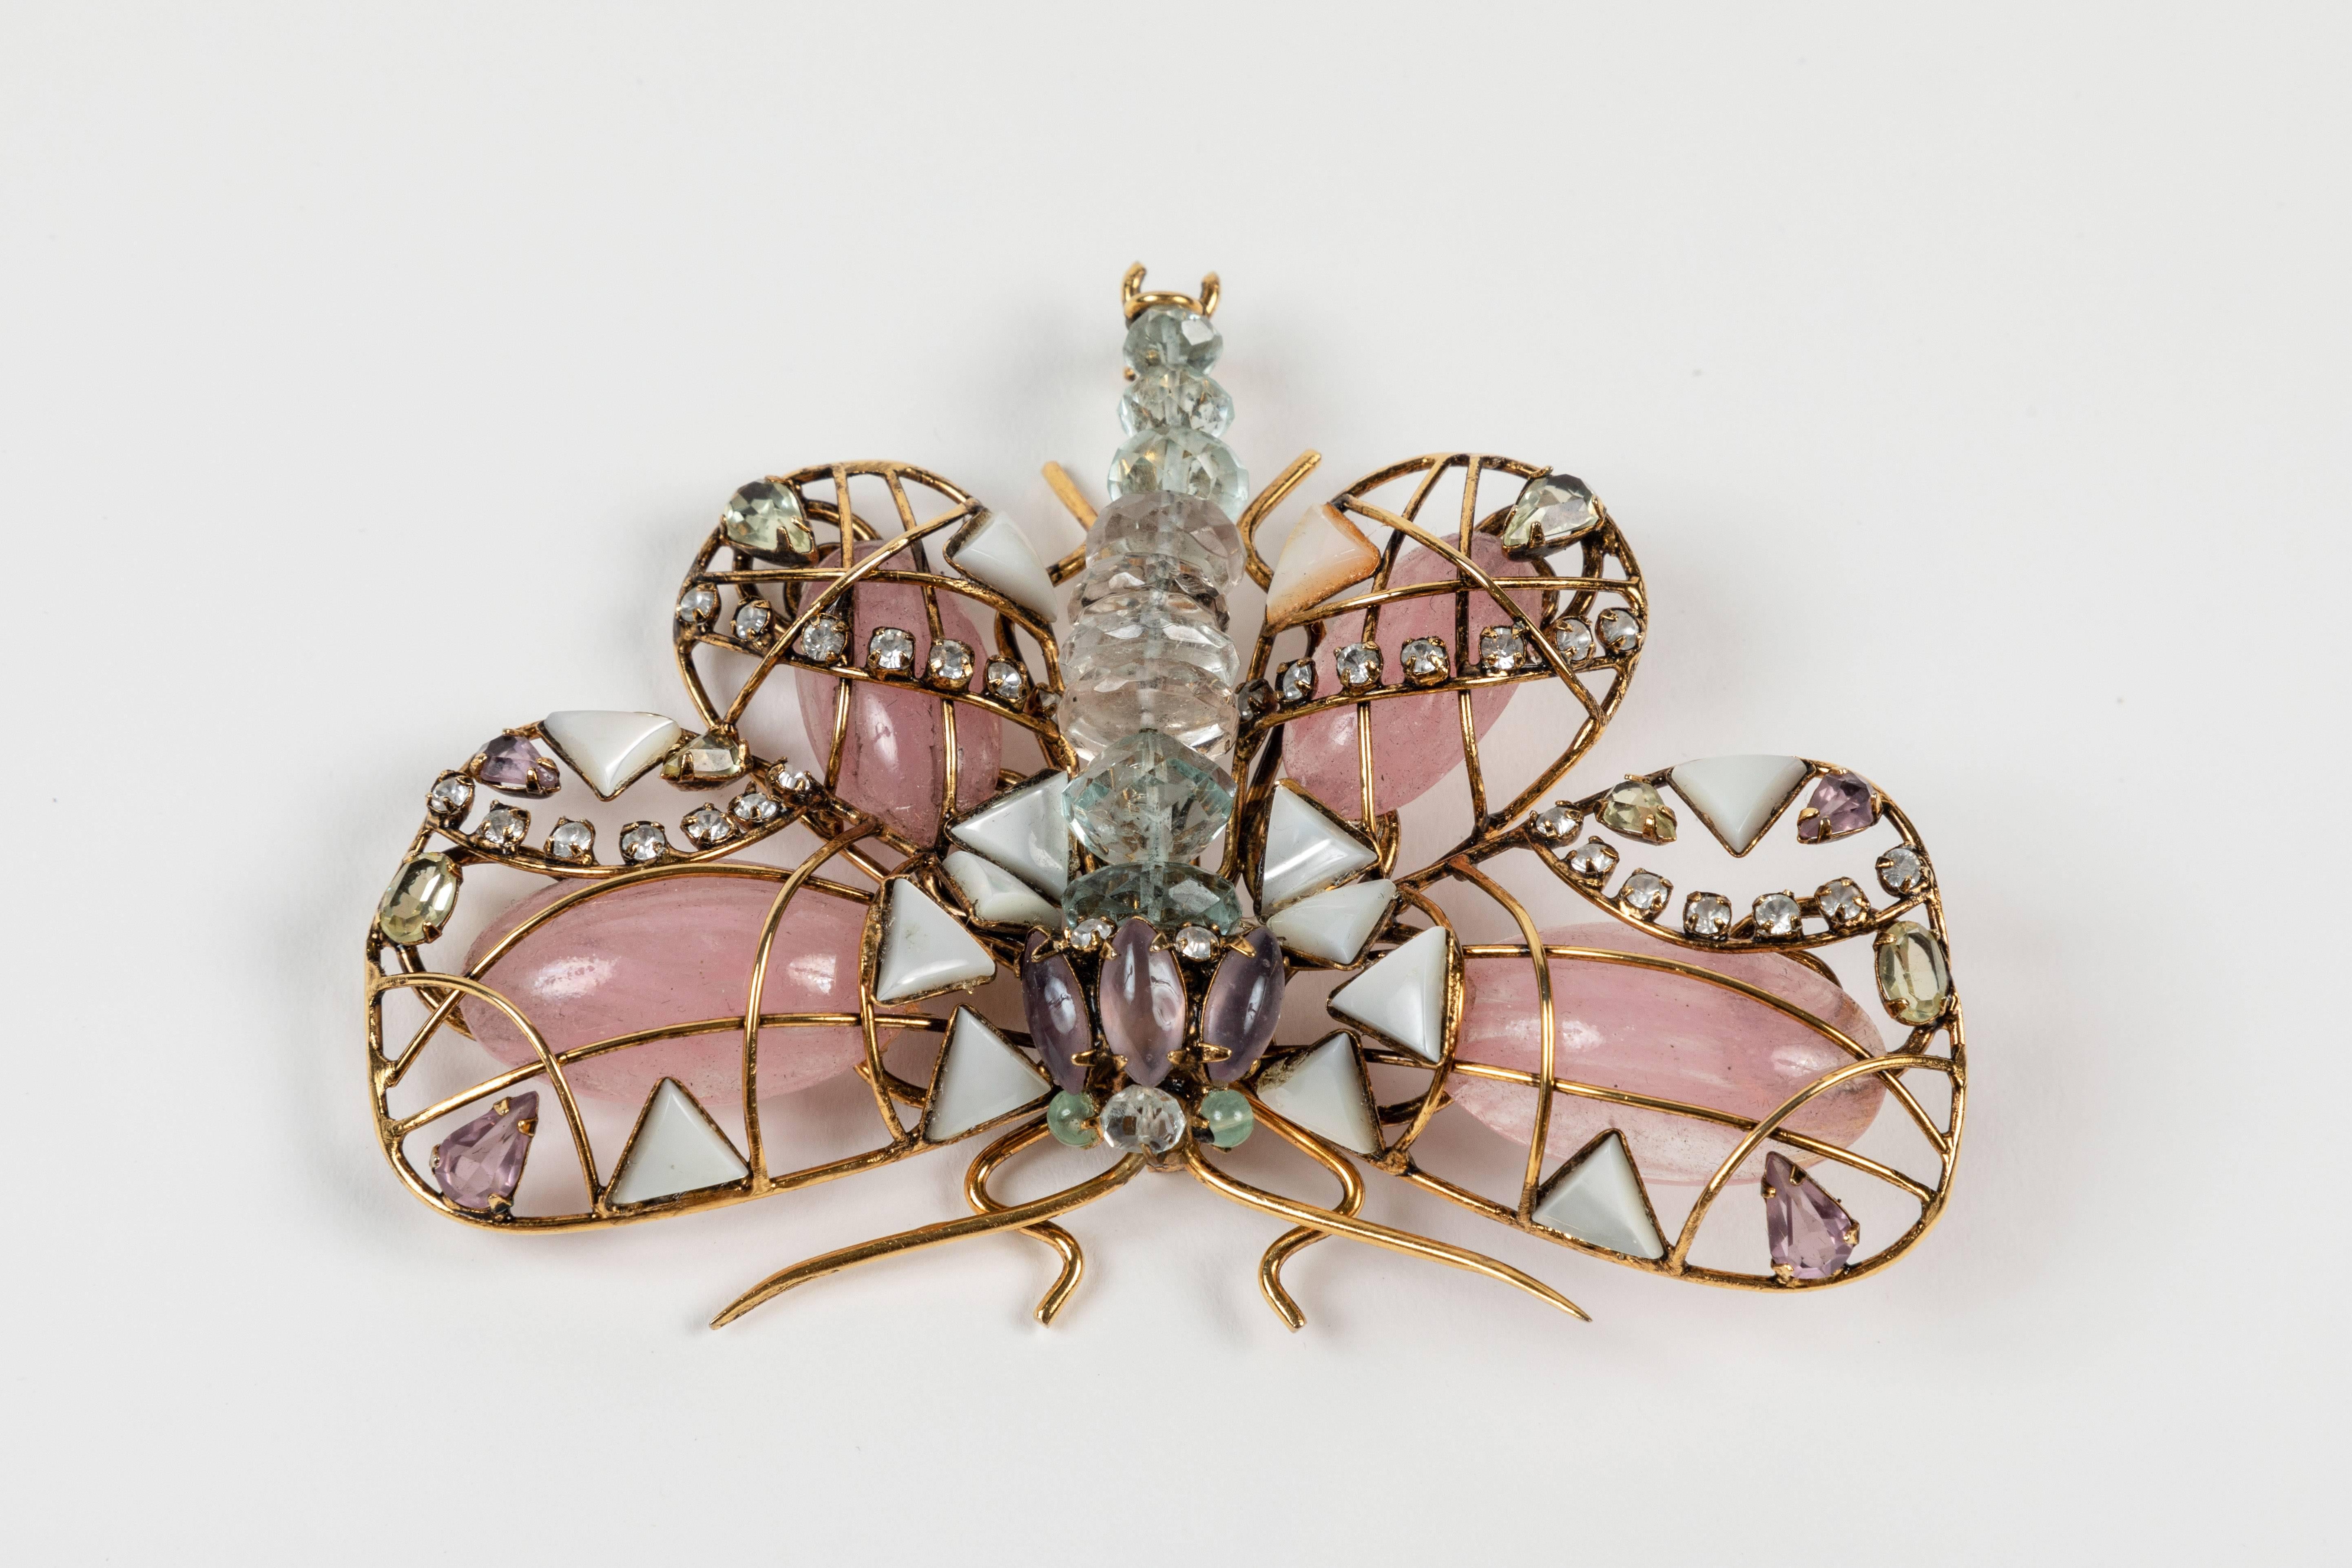 Large and impressive butterfly brooch featuring wings of Rose Quartz, Mother of pearl, and Amethyst and a body of Aquamarines.  All set in a gilt metal frame.  Signed on the reverse and including the original tag.  A real beauty!